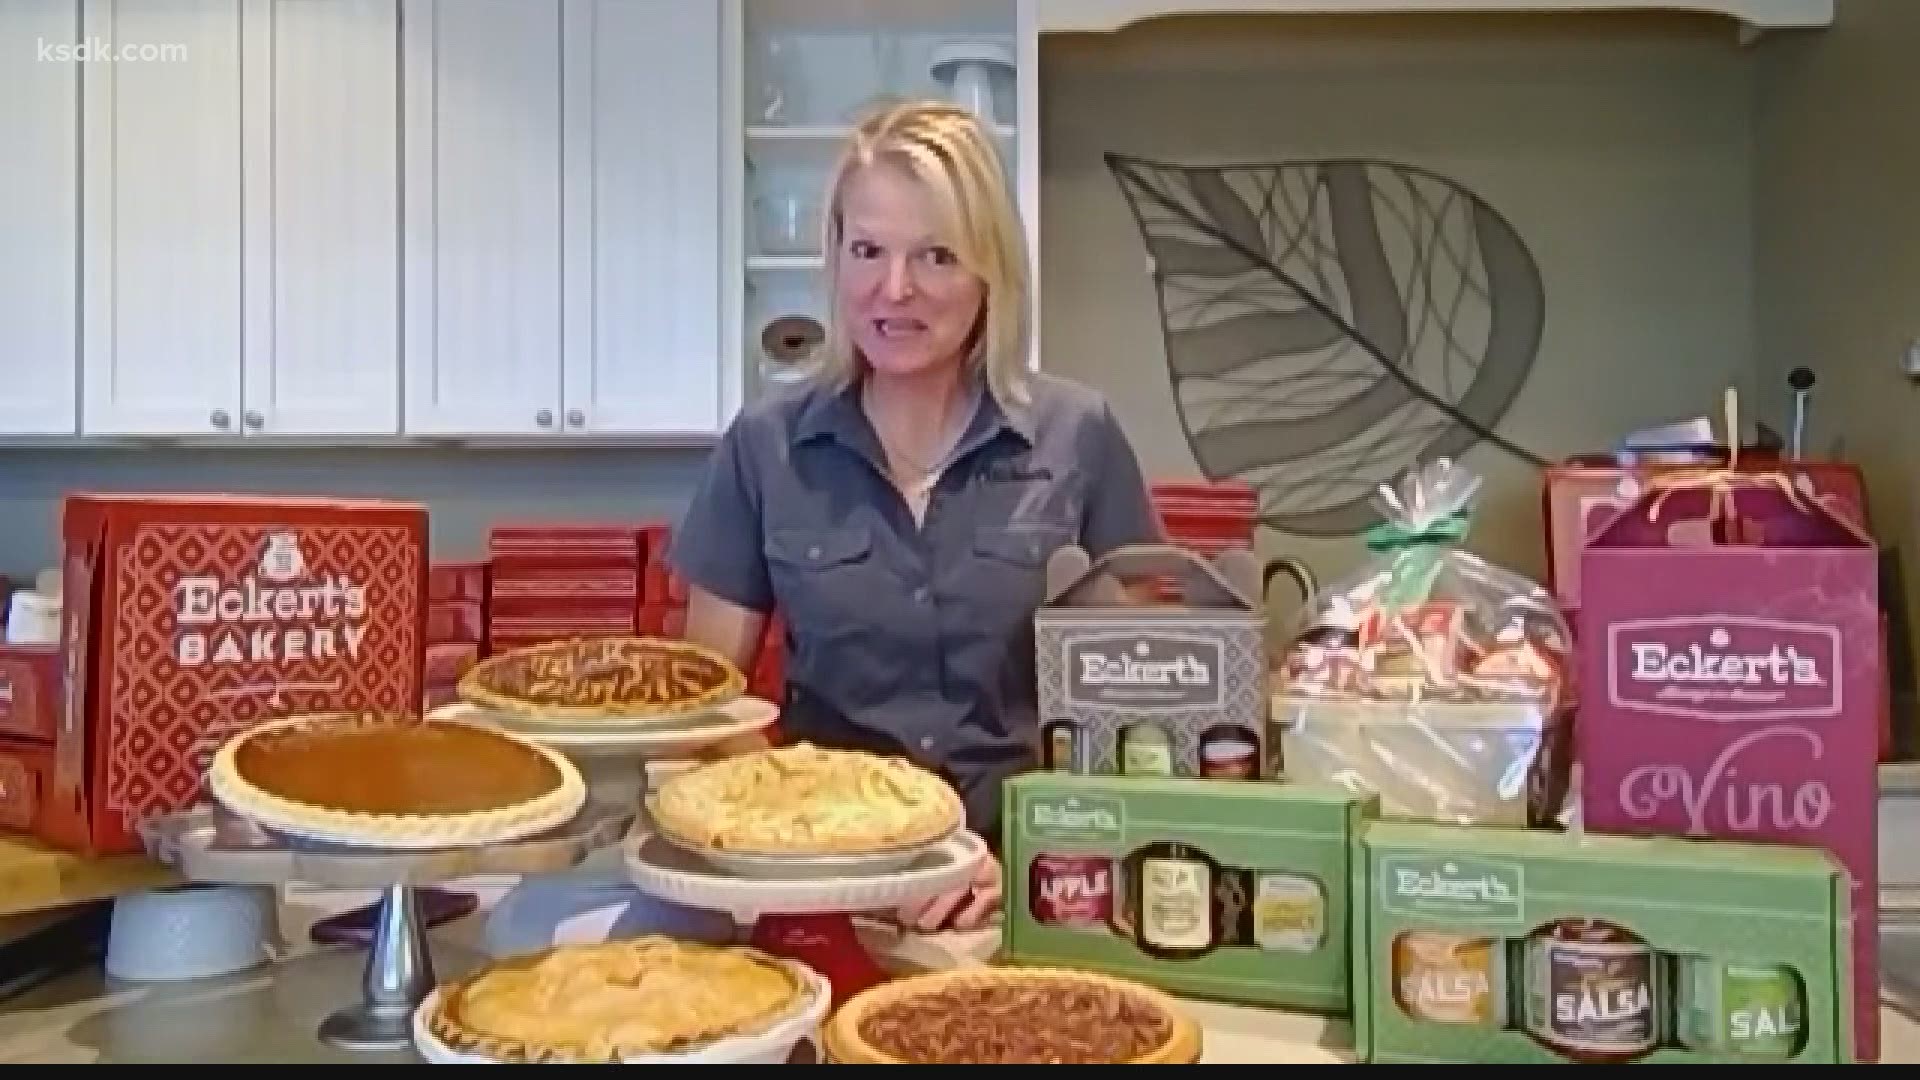 It’s not too late to get your Thanksgiving treats at Eckert’s Farm in Belleville!